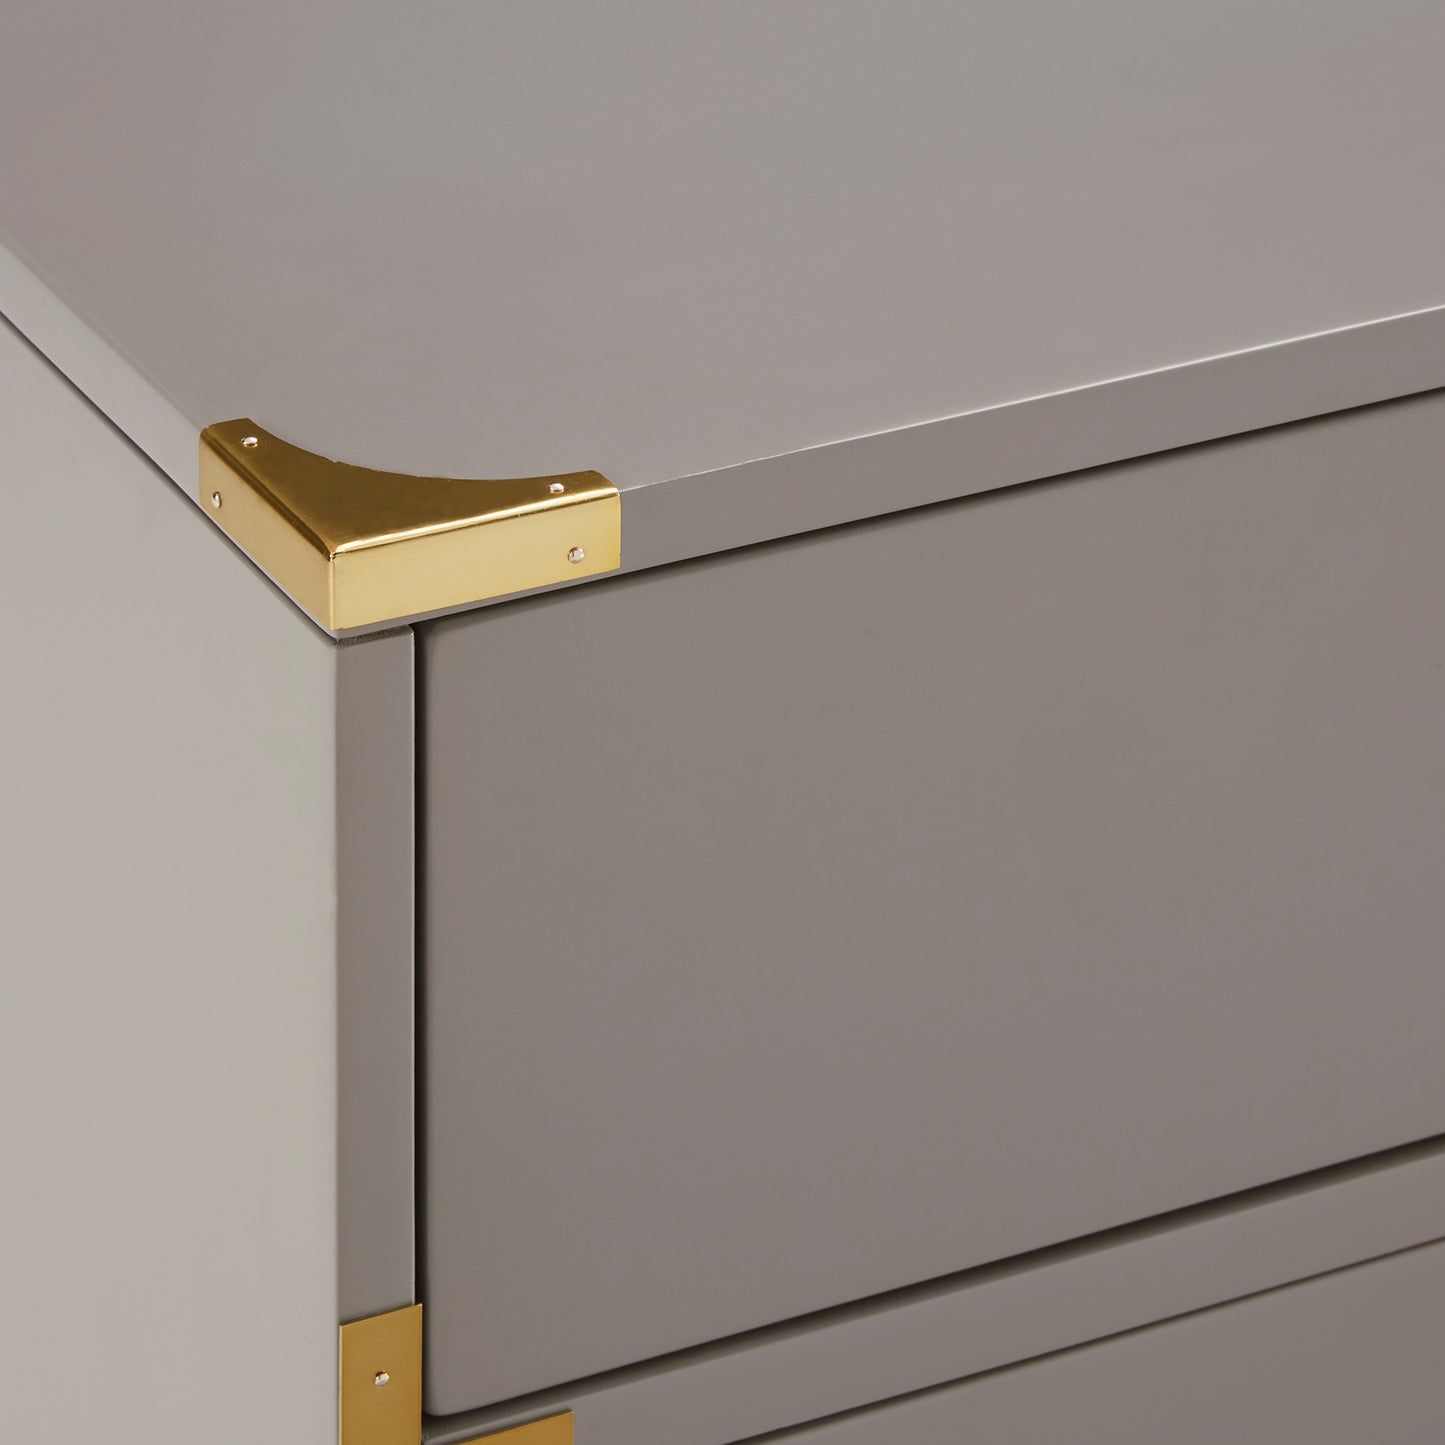 3-Drawer Gold Accent Nightstand - Frost Grey